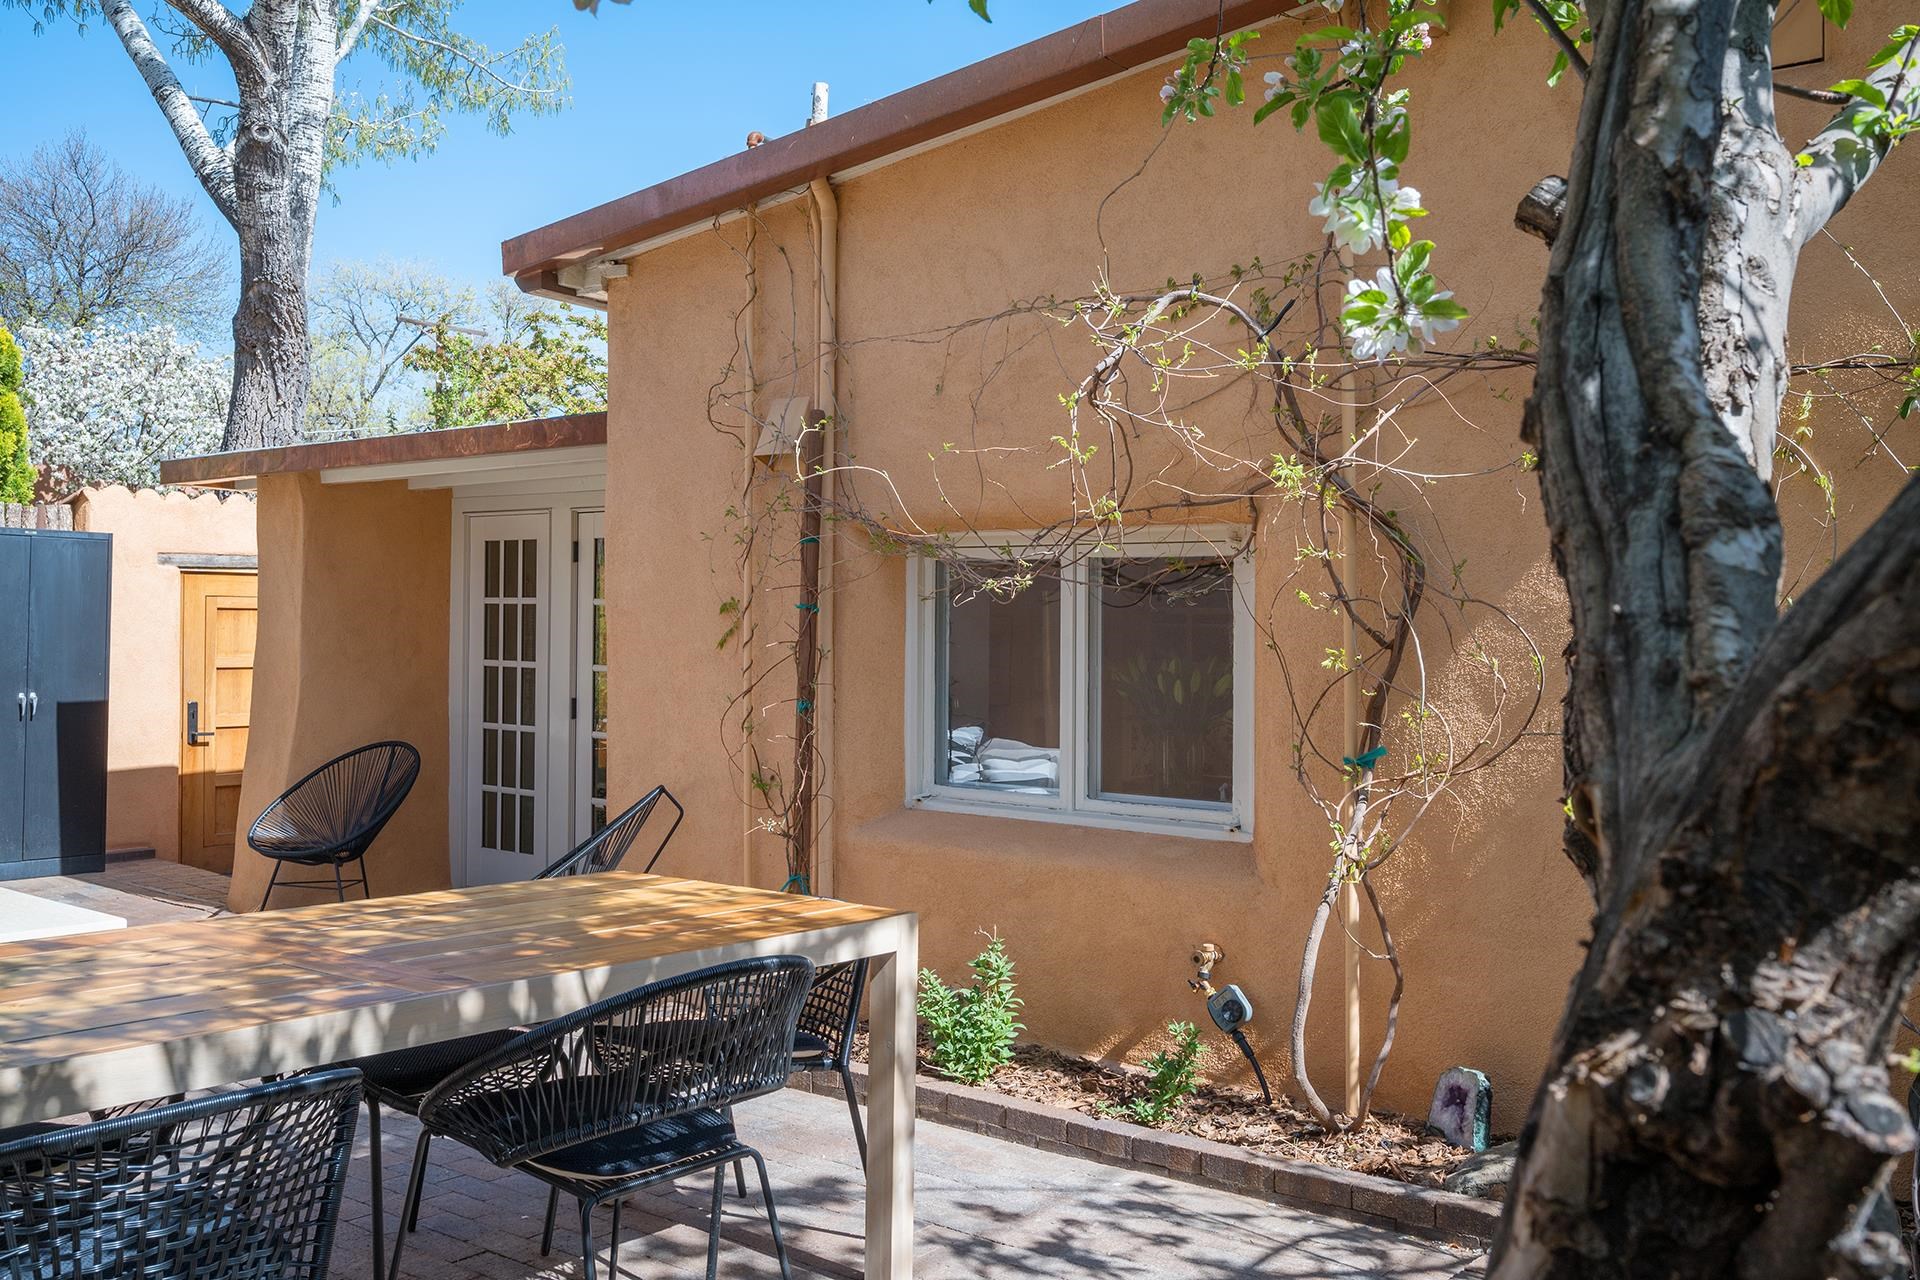 644 CANYON #3, Santa Fe, New Mexico 87501, 1 Bedroom Bedrooms, ,1 BathroomBathrooms,Residential,For Sale,644 CANYON #3,202201453